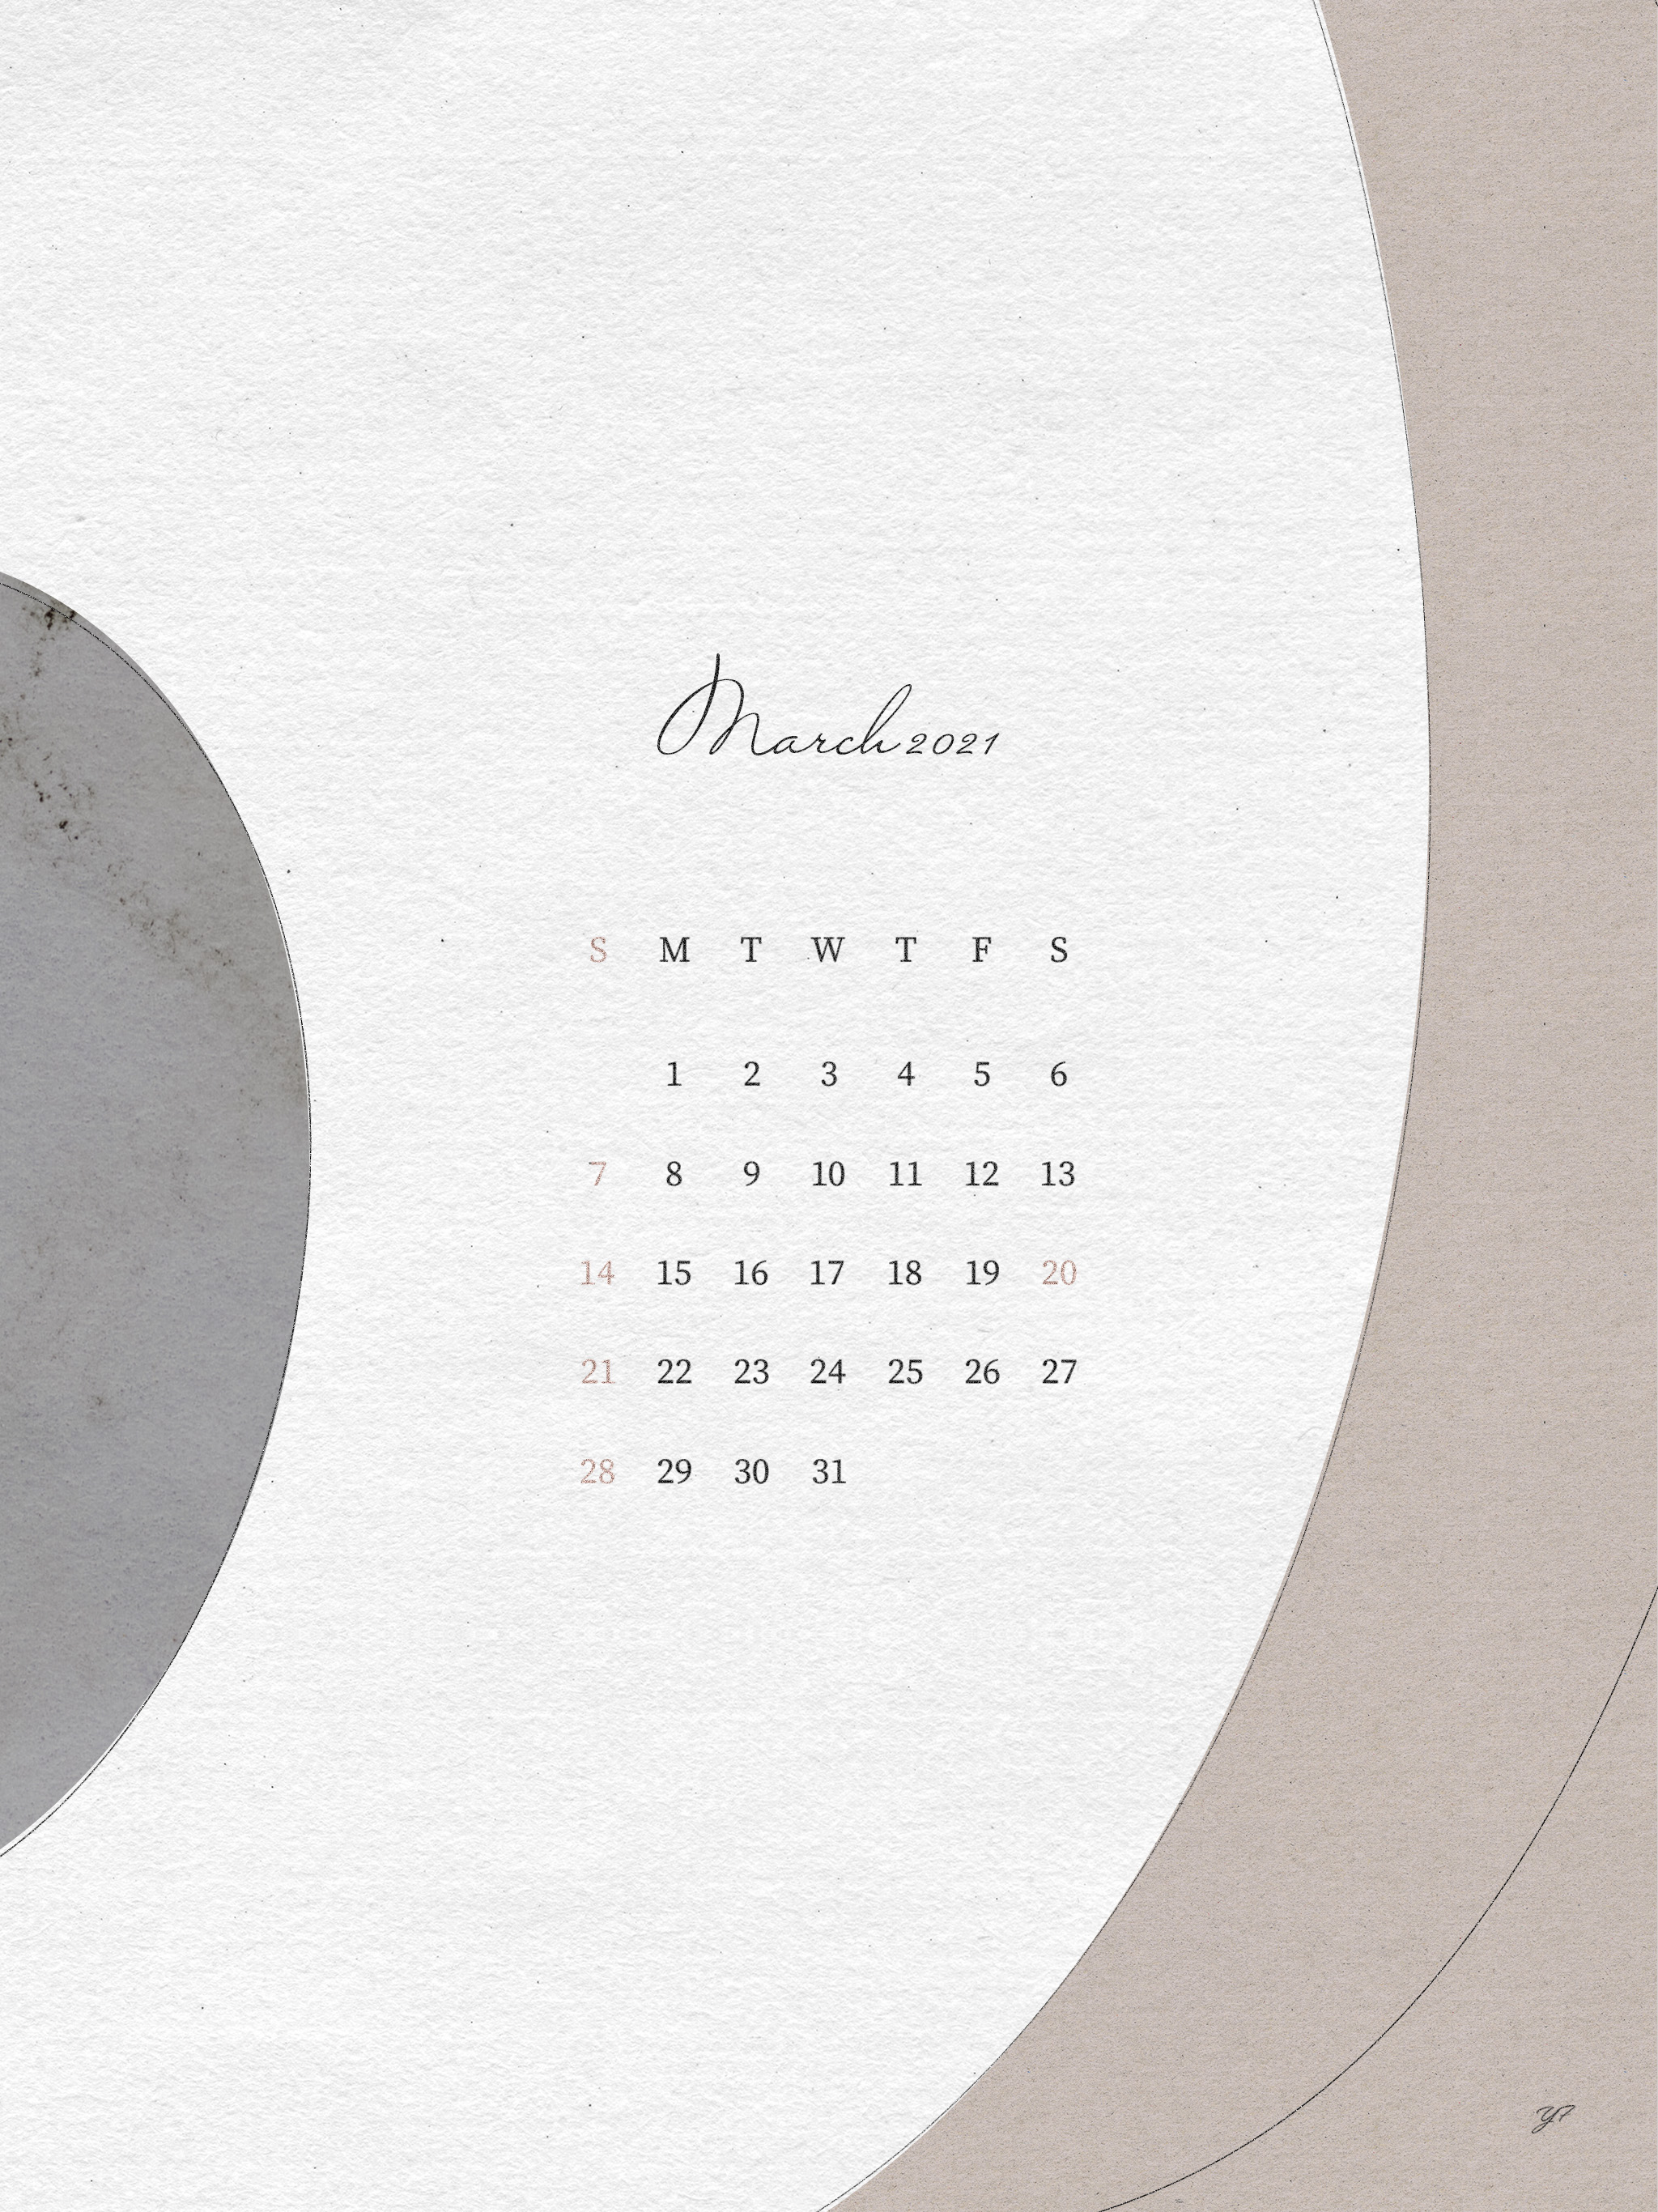 March 21 Calendar Wallpaper For The Ipad Design By Yf